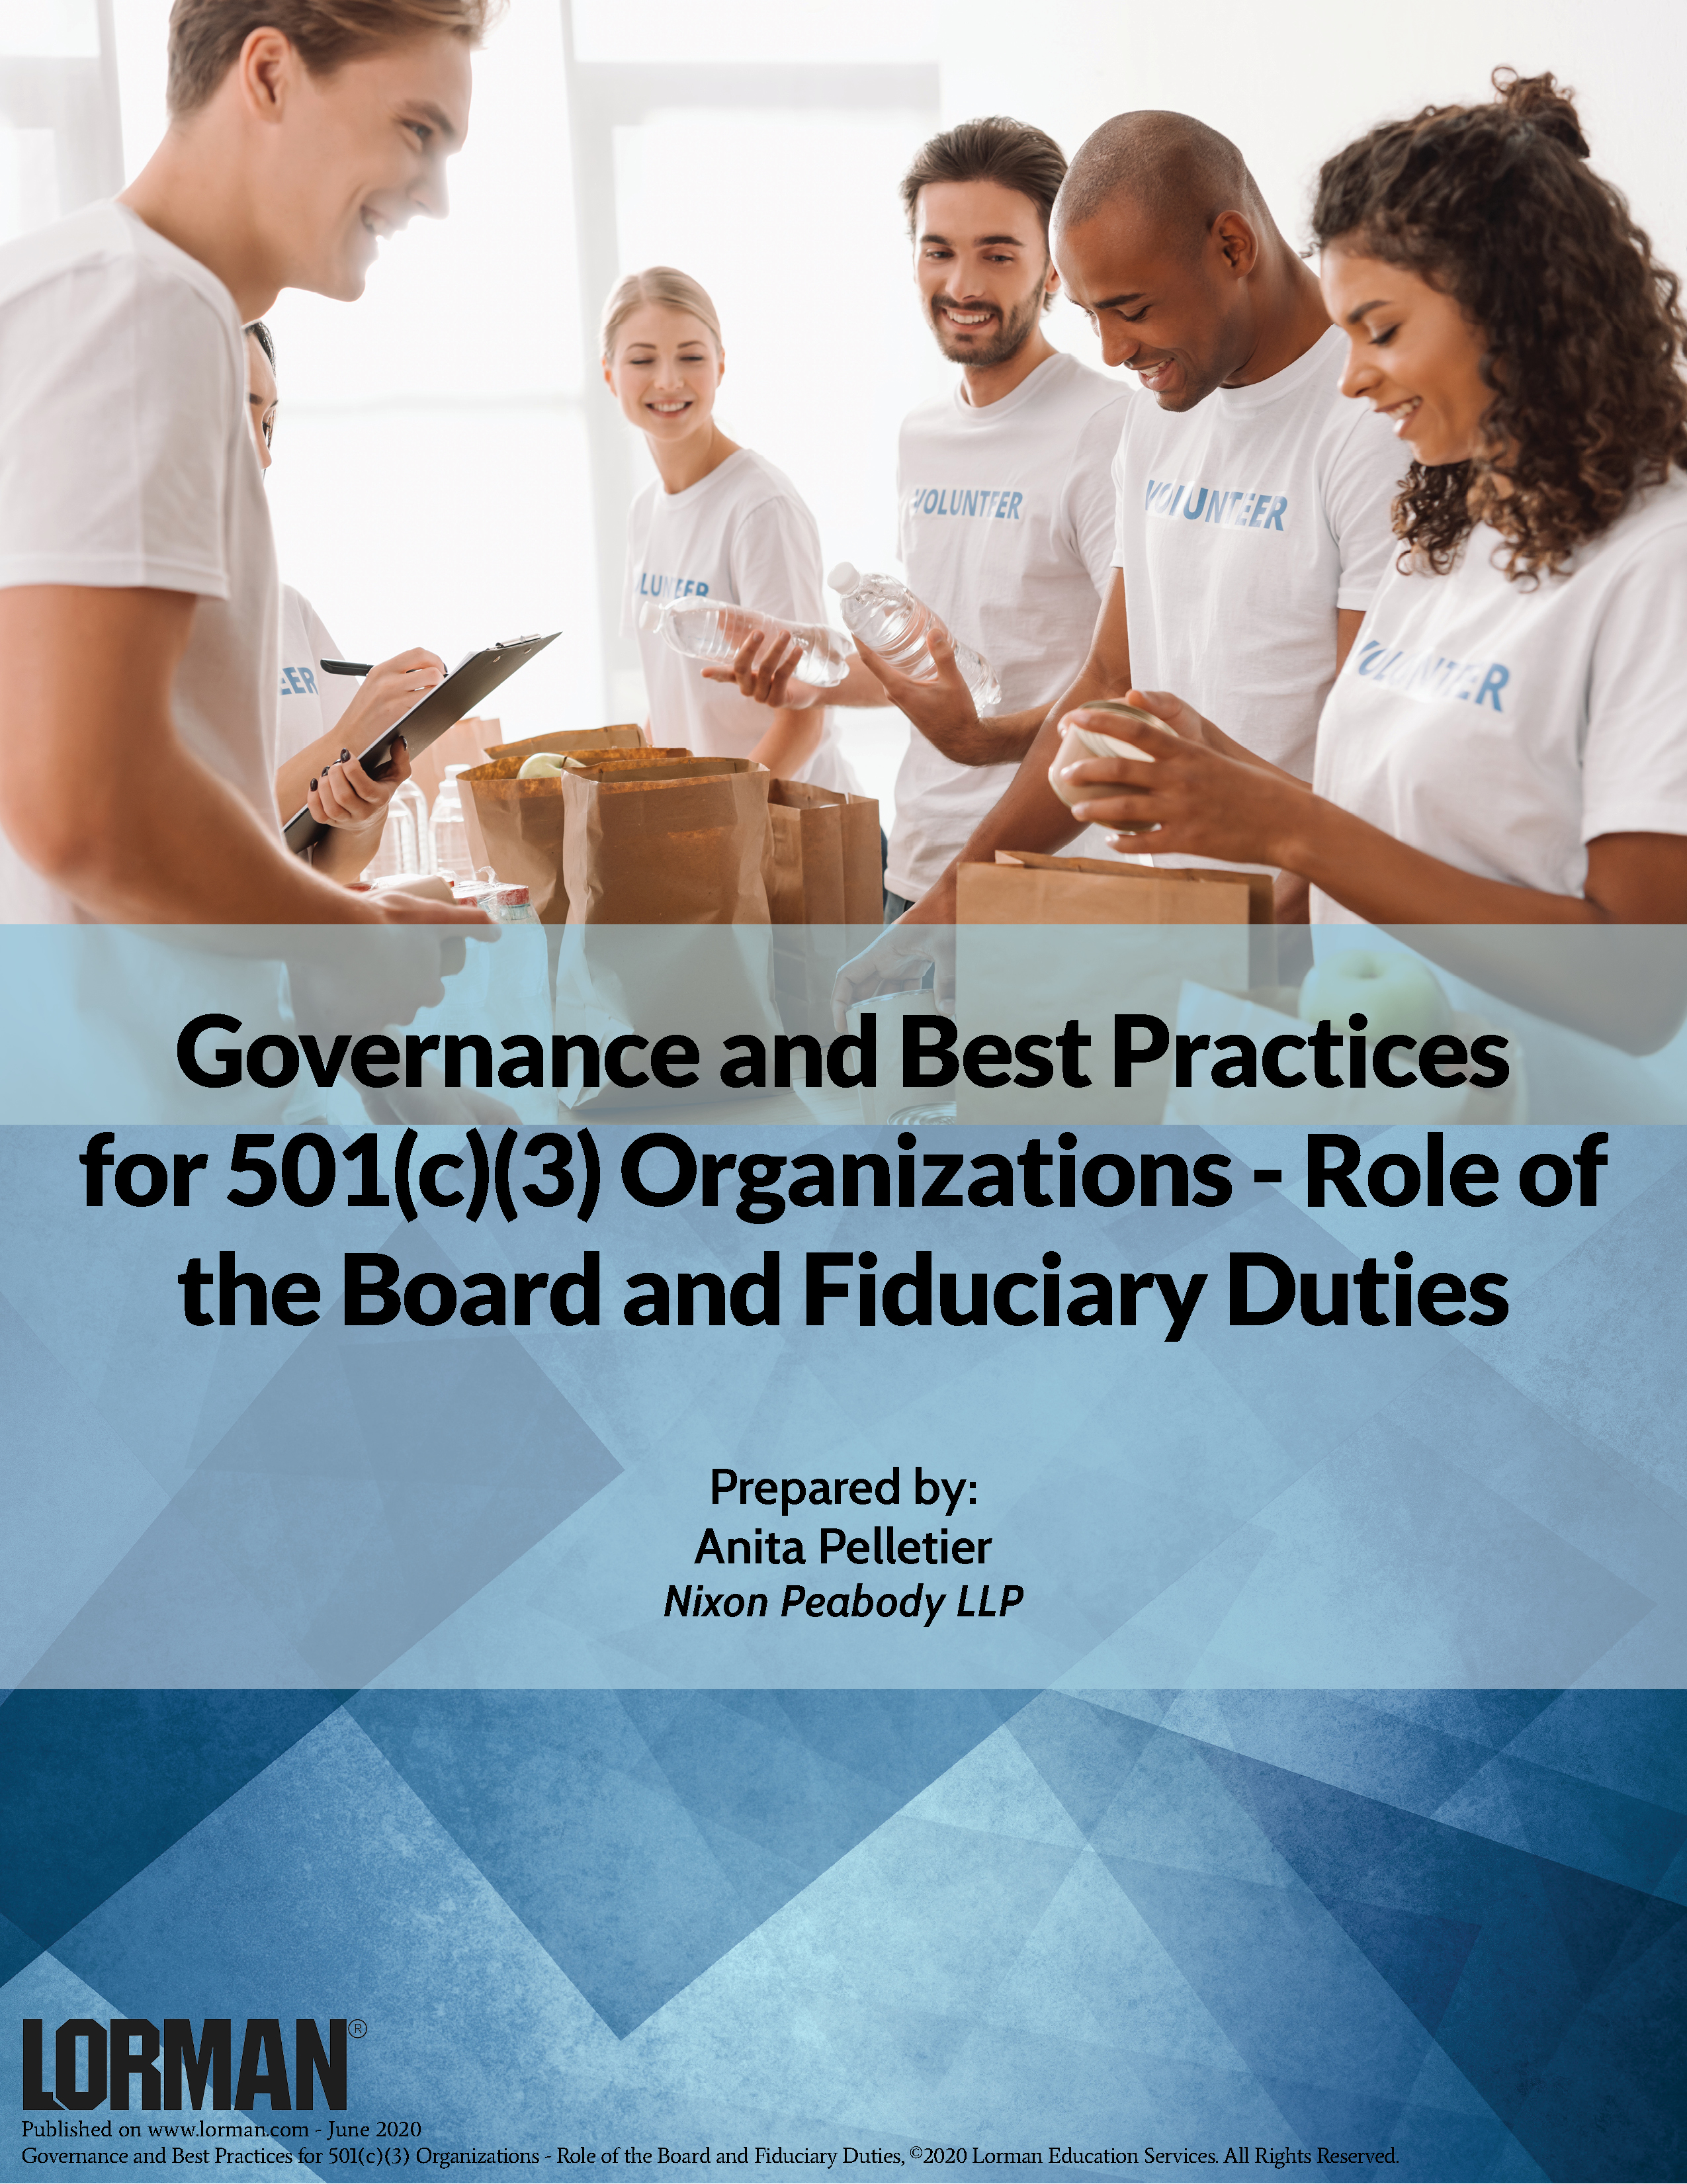 Governance and Best Practices for 501(c)(3) Organizations - Role of the Board and Fiduciary Duties